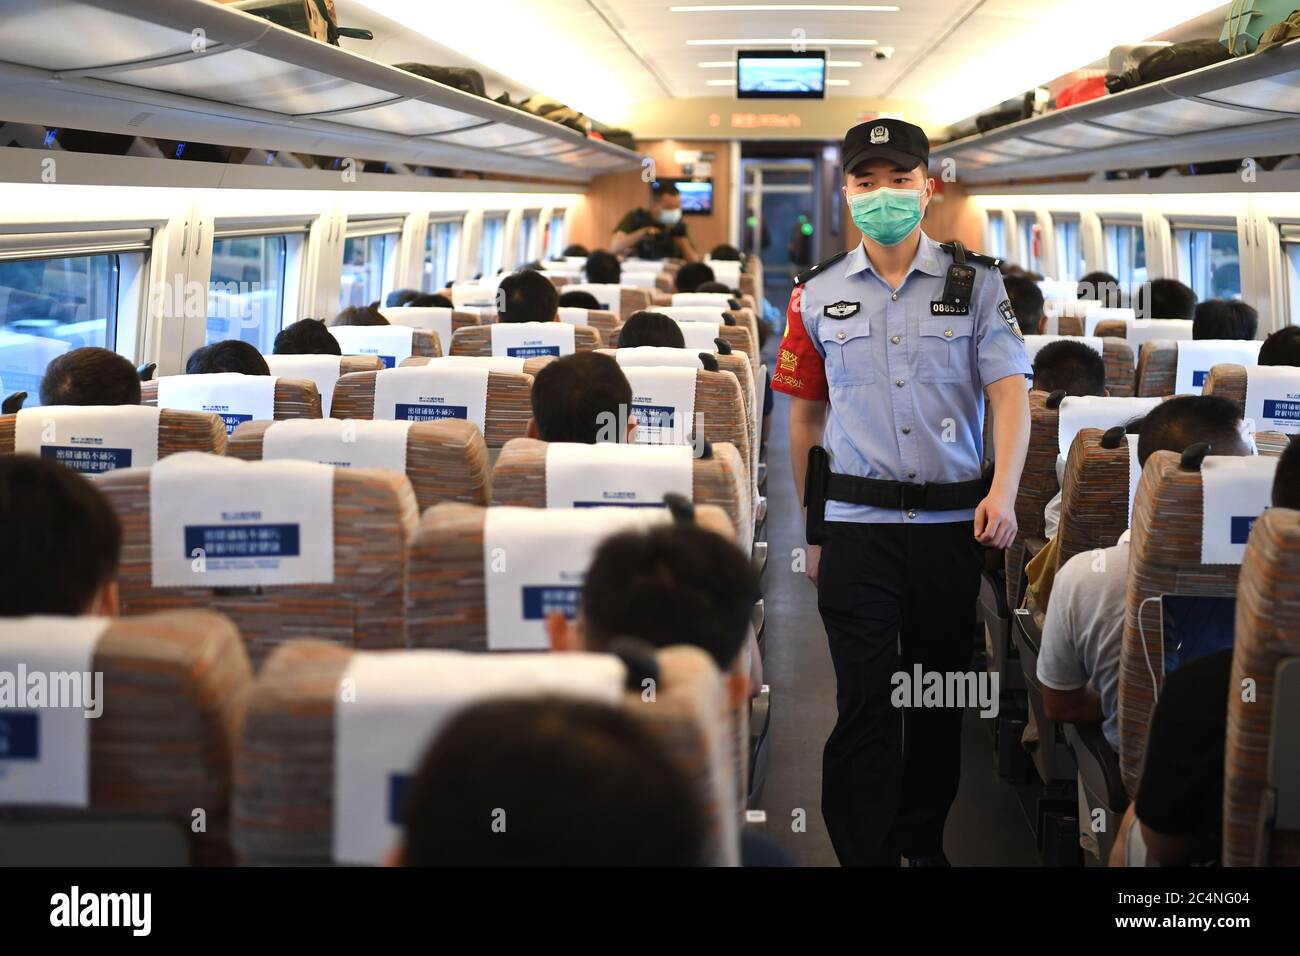 Hefei. 28th June, 2020. A railway police carries out inspection aboard a bullet train travelling from Hefei to Hangzhou on the Shangqiu-Hefei-Hangzhou high-speed railway on June 28, 2020. A new high-speed railway route connecting east and central China started operation on Sunday. With a designed speed of 350 kph, the route connects the city of Shangqiu in central China's Henan Province, and Hefei and Hangzhou, the capital cities of east China's Anhui and Zhejiang provinces. Credit: Liu Junxi/Xinhua/Alamy Live News Stock Photo